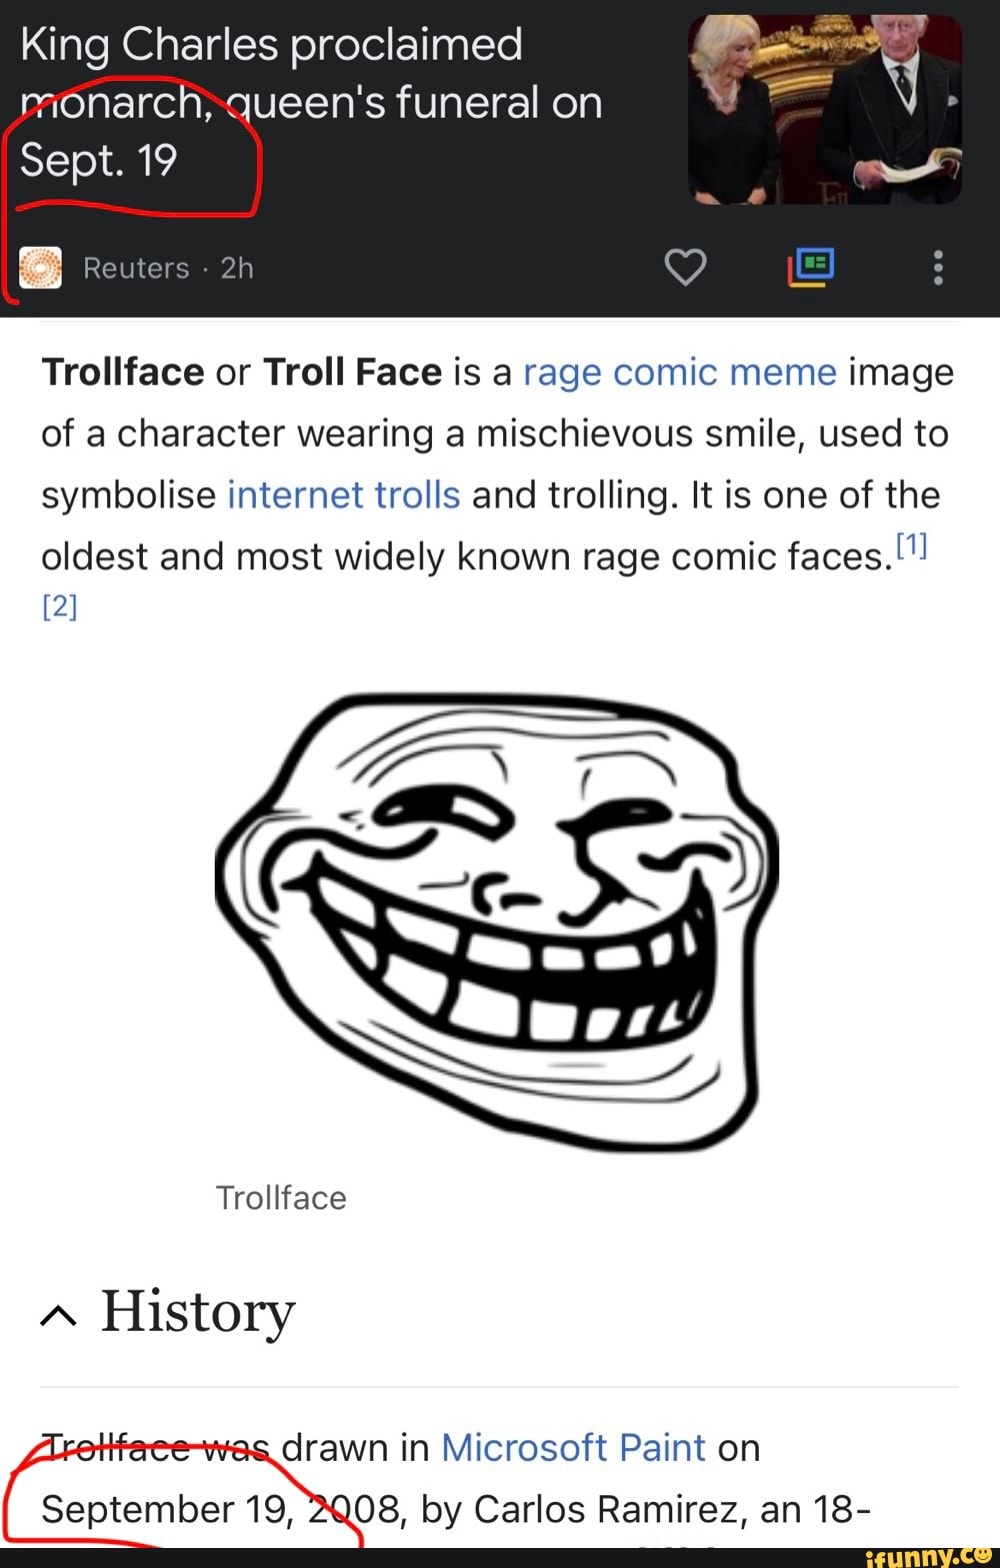 Trollface: A Complete History 